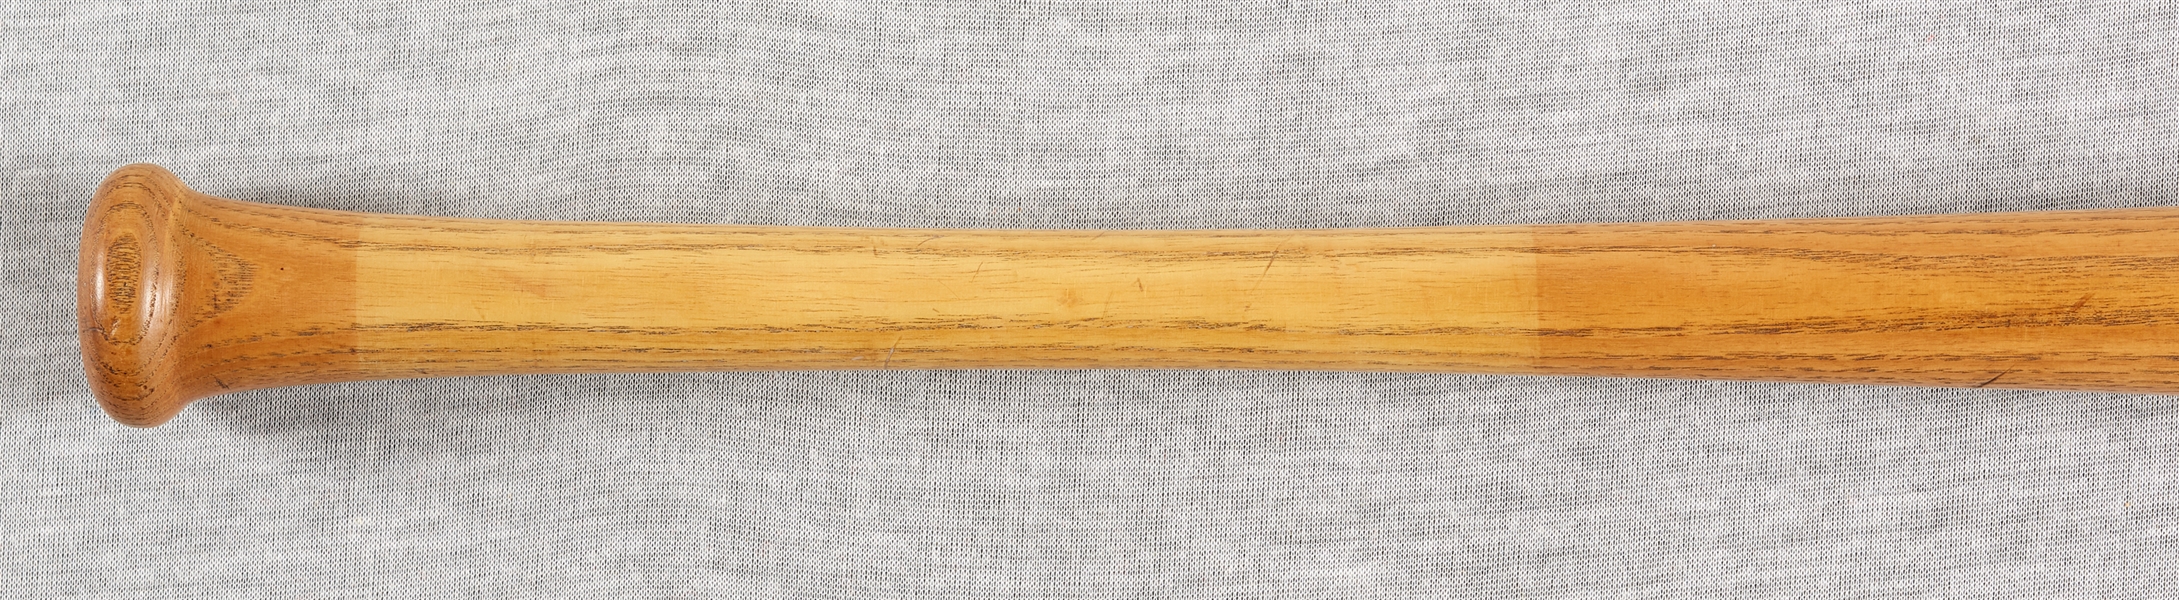 Babe Ruth Late 1920s/Early 1930s H&B Store Model Bat